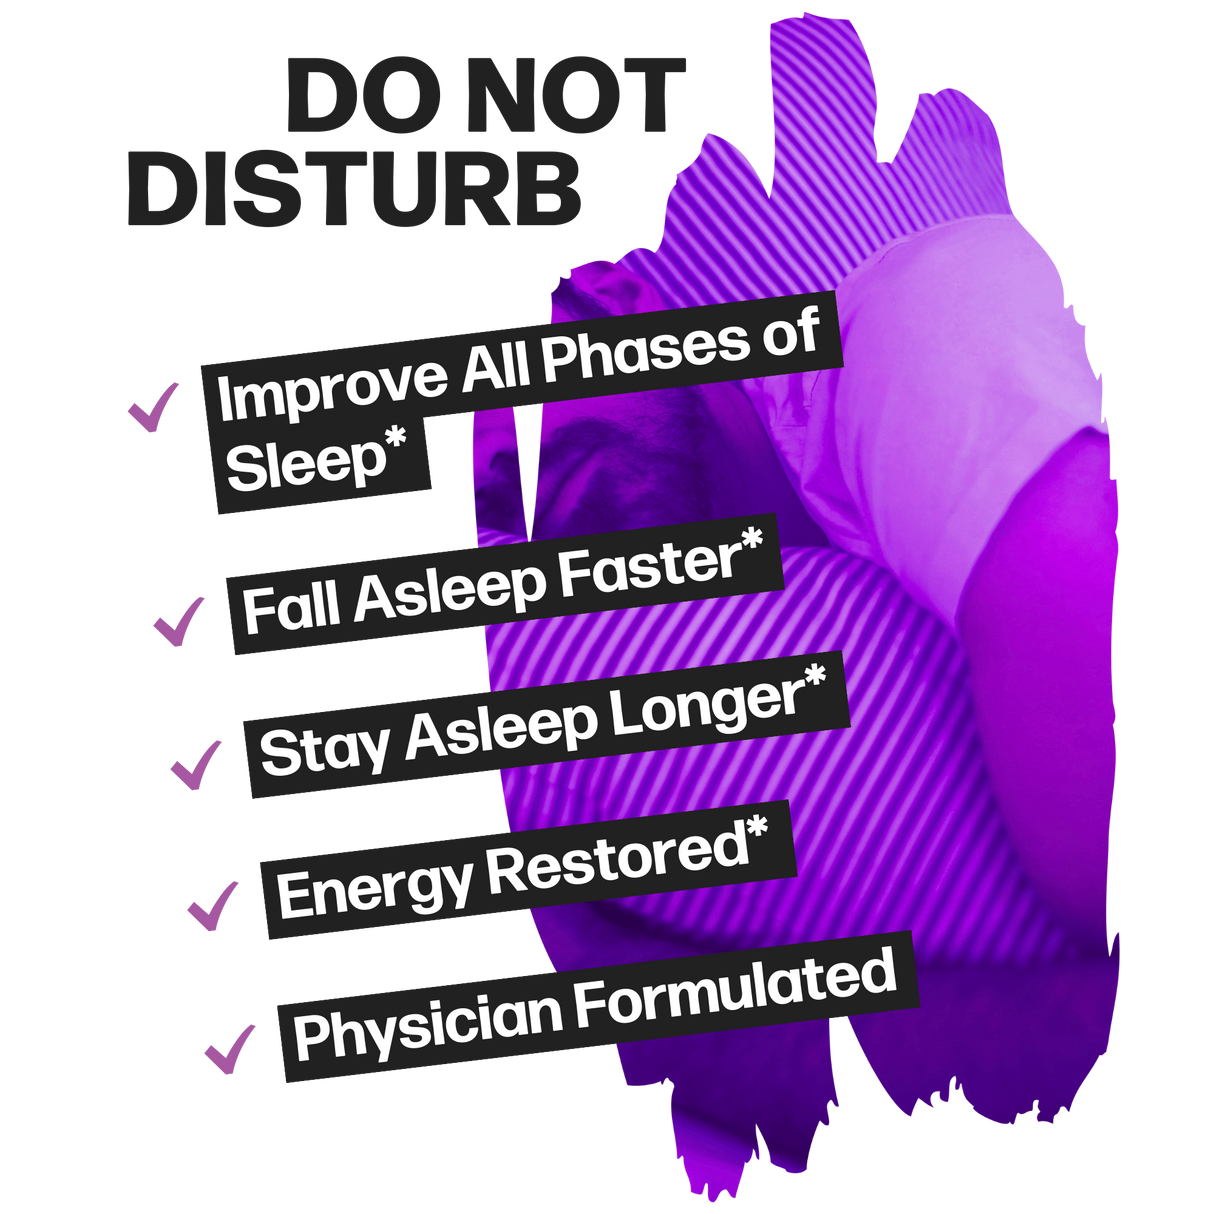 Life Happns Do Not Disturb Good Night Supplement Benefits Listed as Improve All Phases of Sleep, Fall Asleep Faster, Stay Asleep Longer, Energy Restored, and Physician Formulated